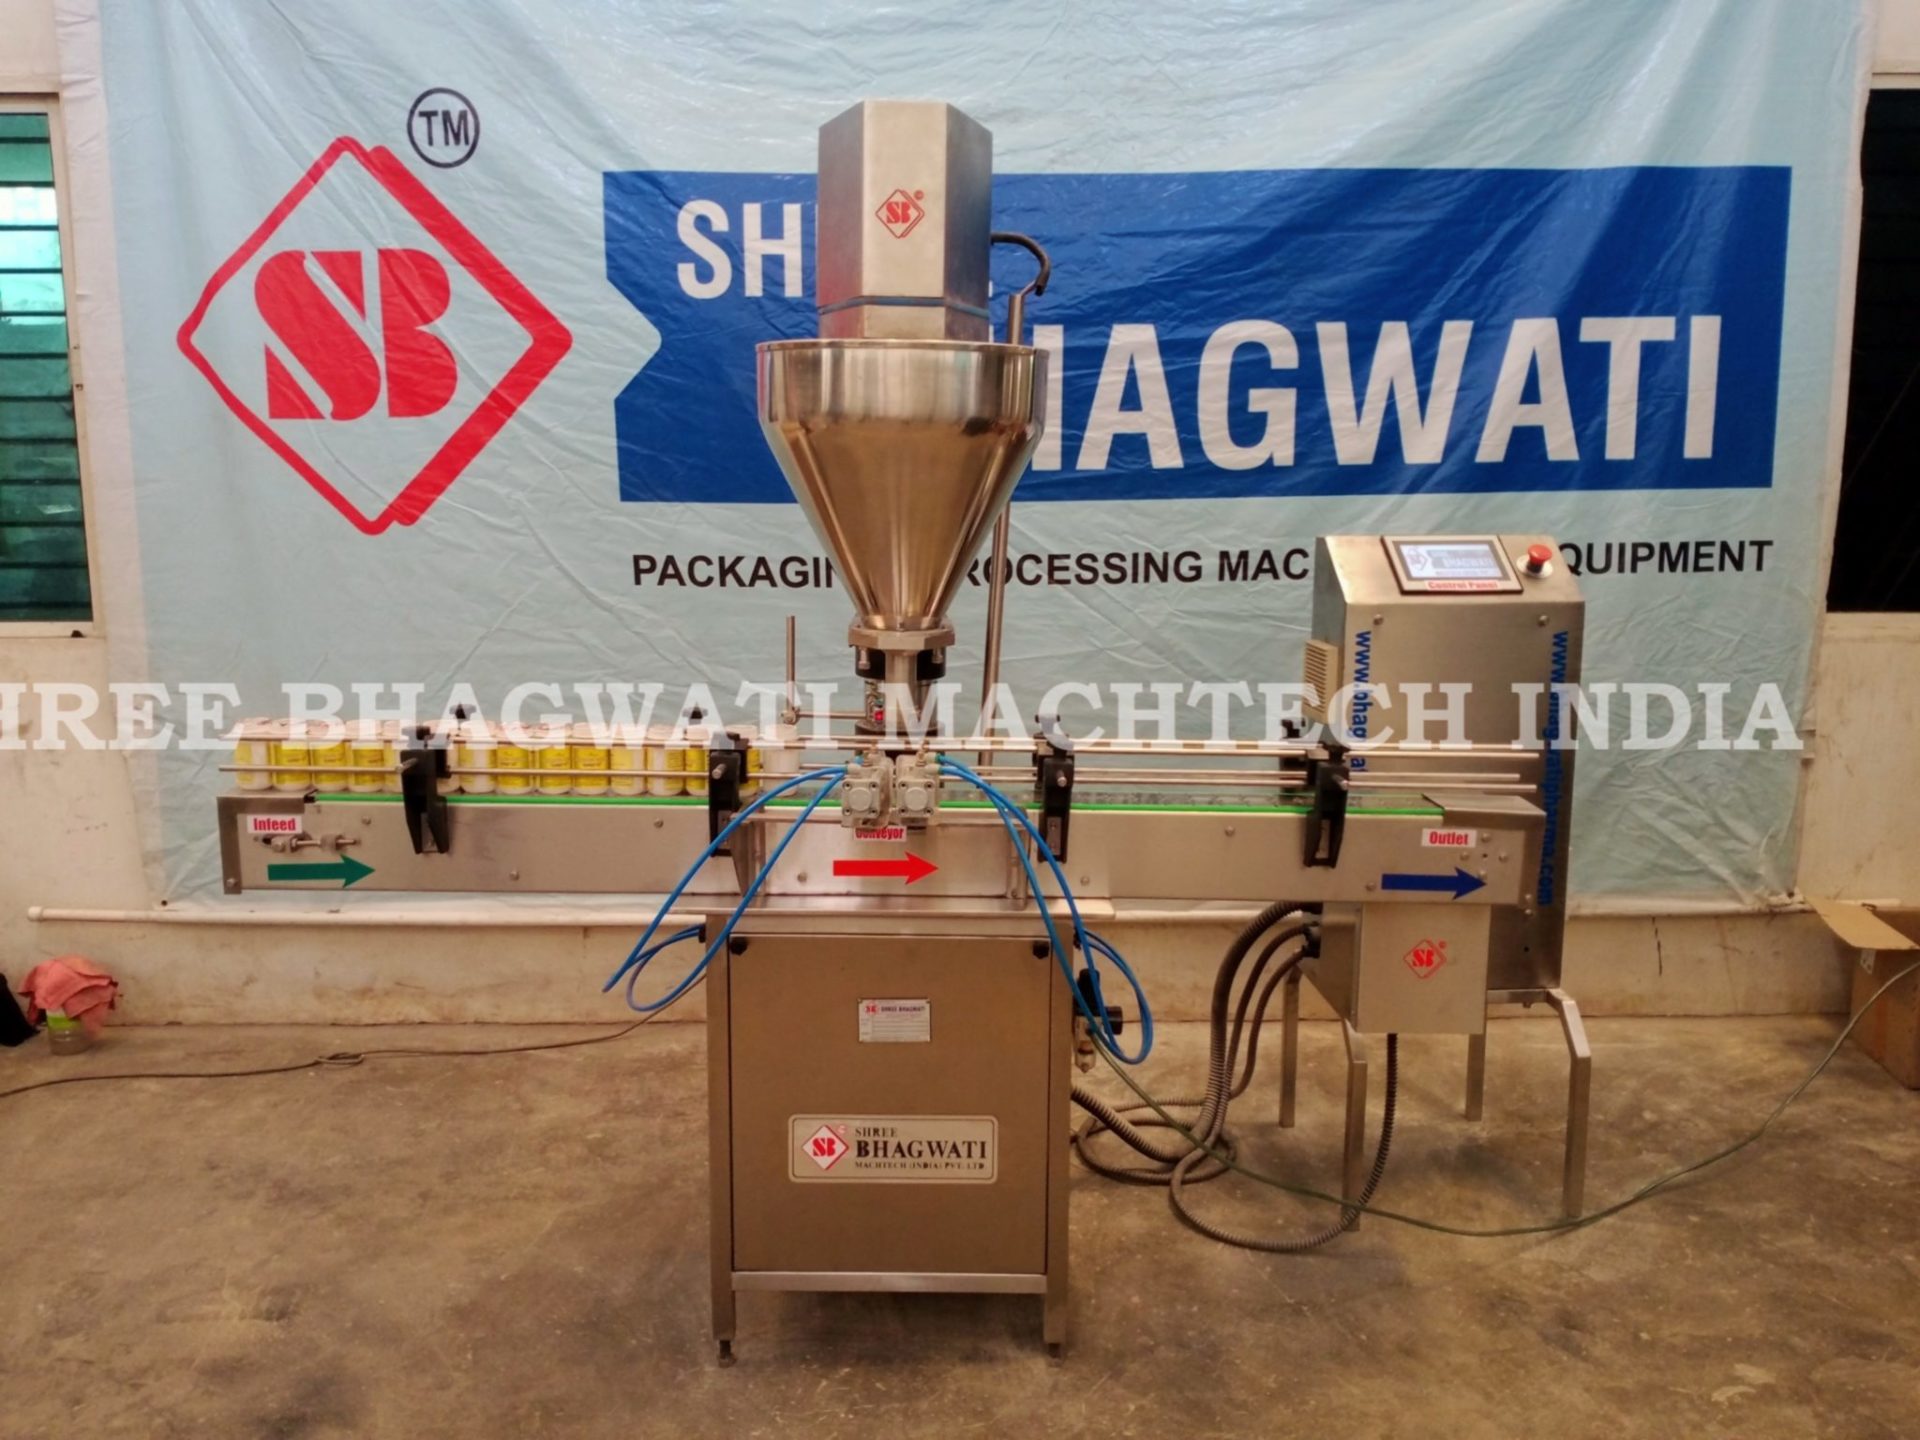 Auger Powder filling machine with Powder transfer for seasoning and herbs into pouches, jars and tins